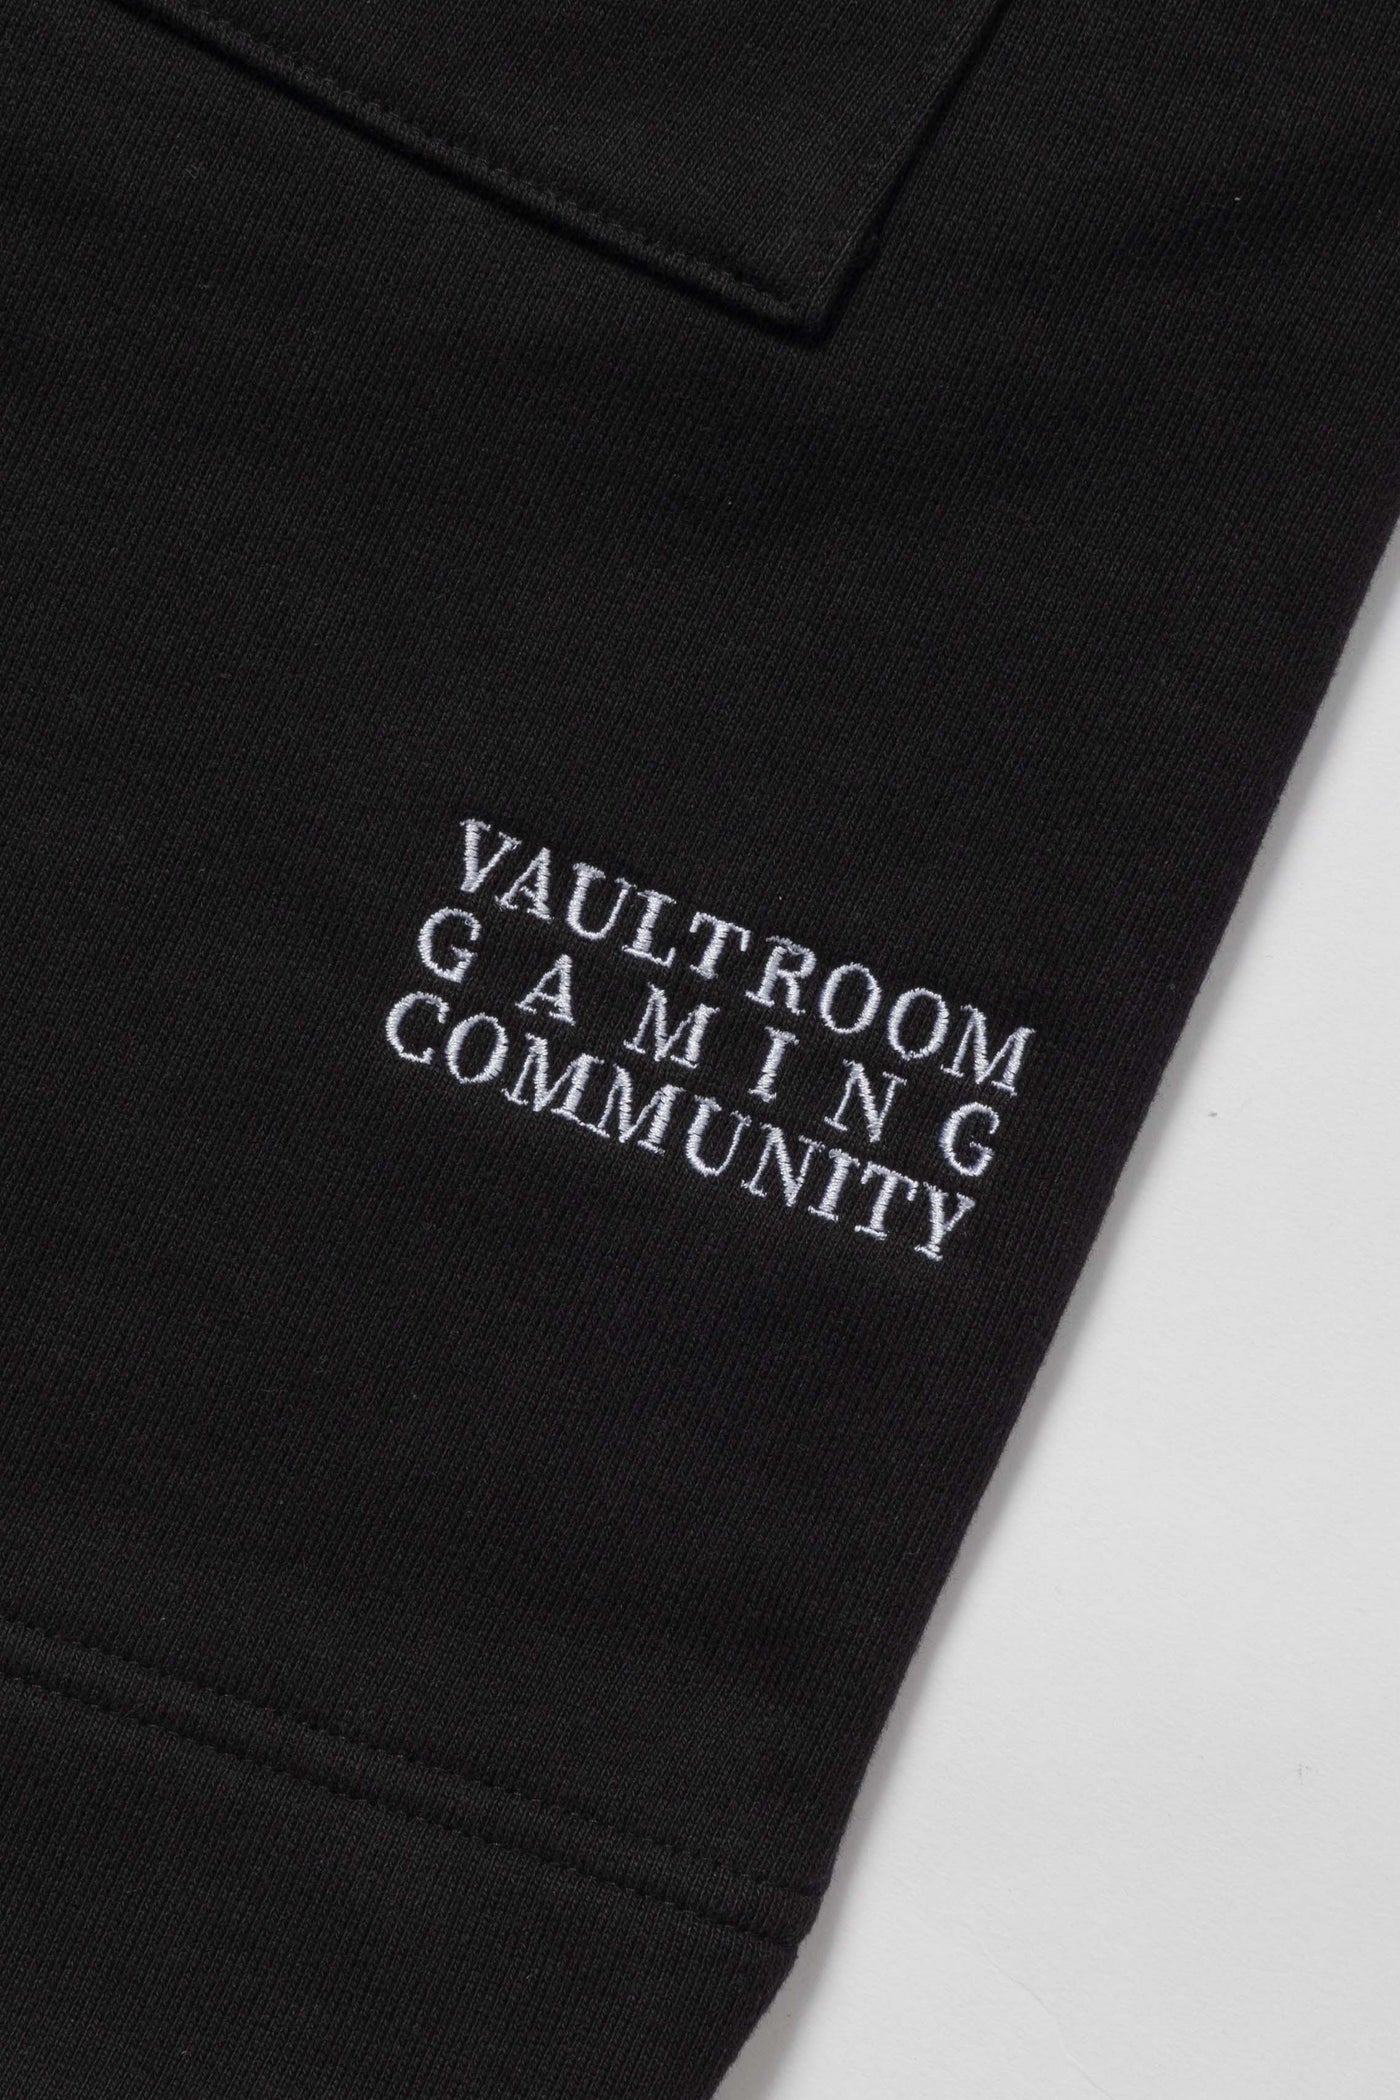 VAULT ROOM // VGC FRENCH TERRY SHORTS